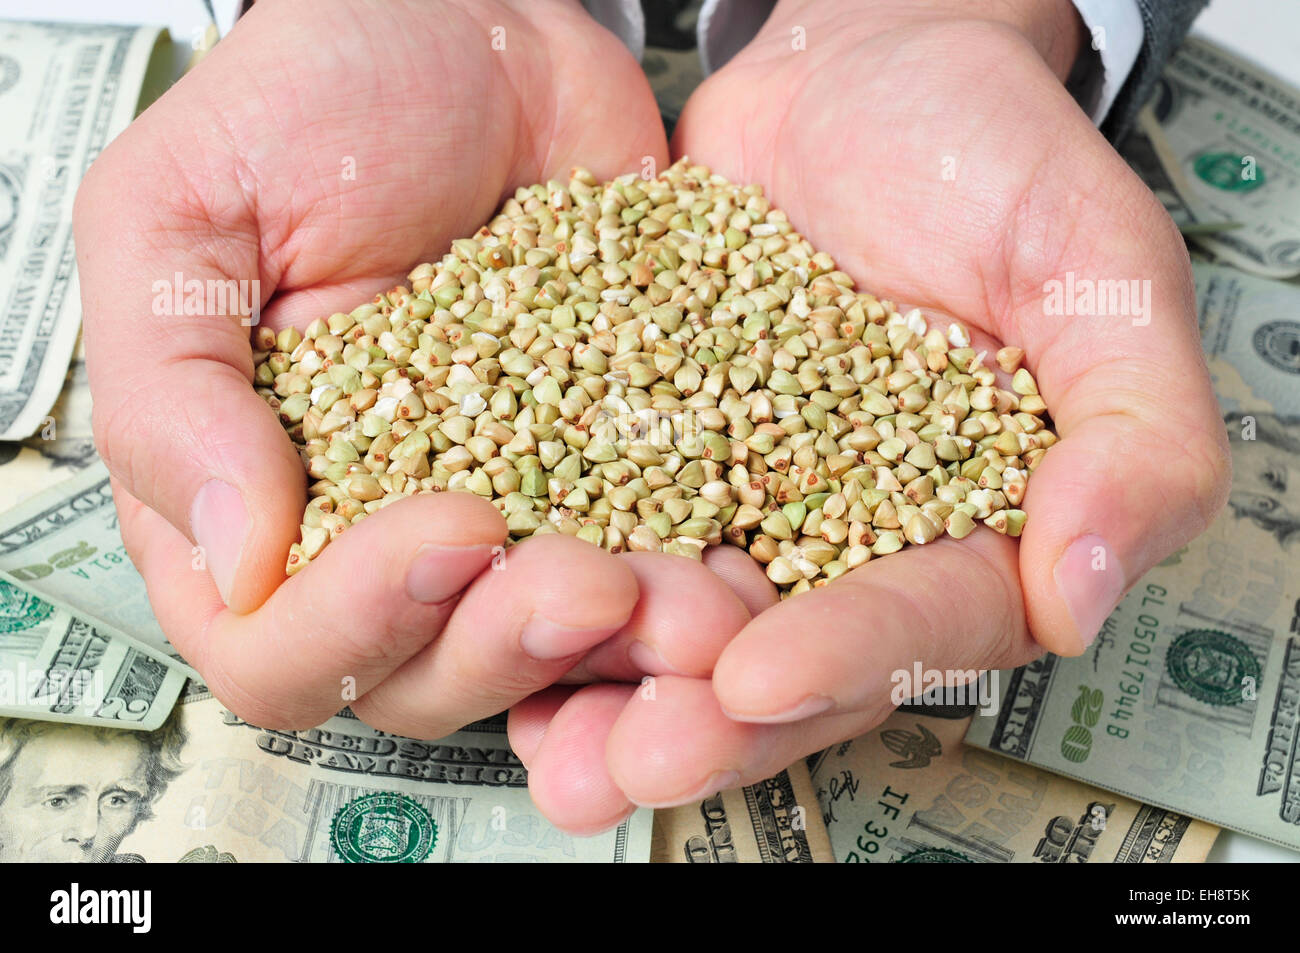 closeup of a pile of buckwheat seeds in the hands of a man on a background full of dollar banknotes, depicting the agribusiness Stock Photo